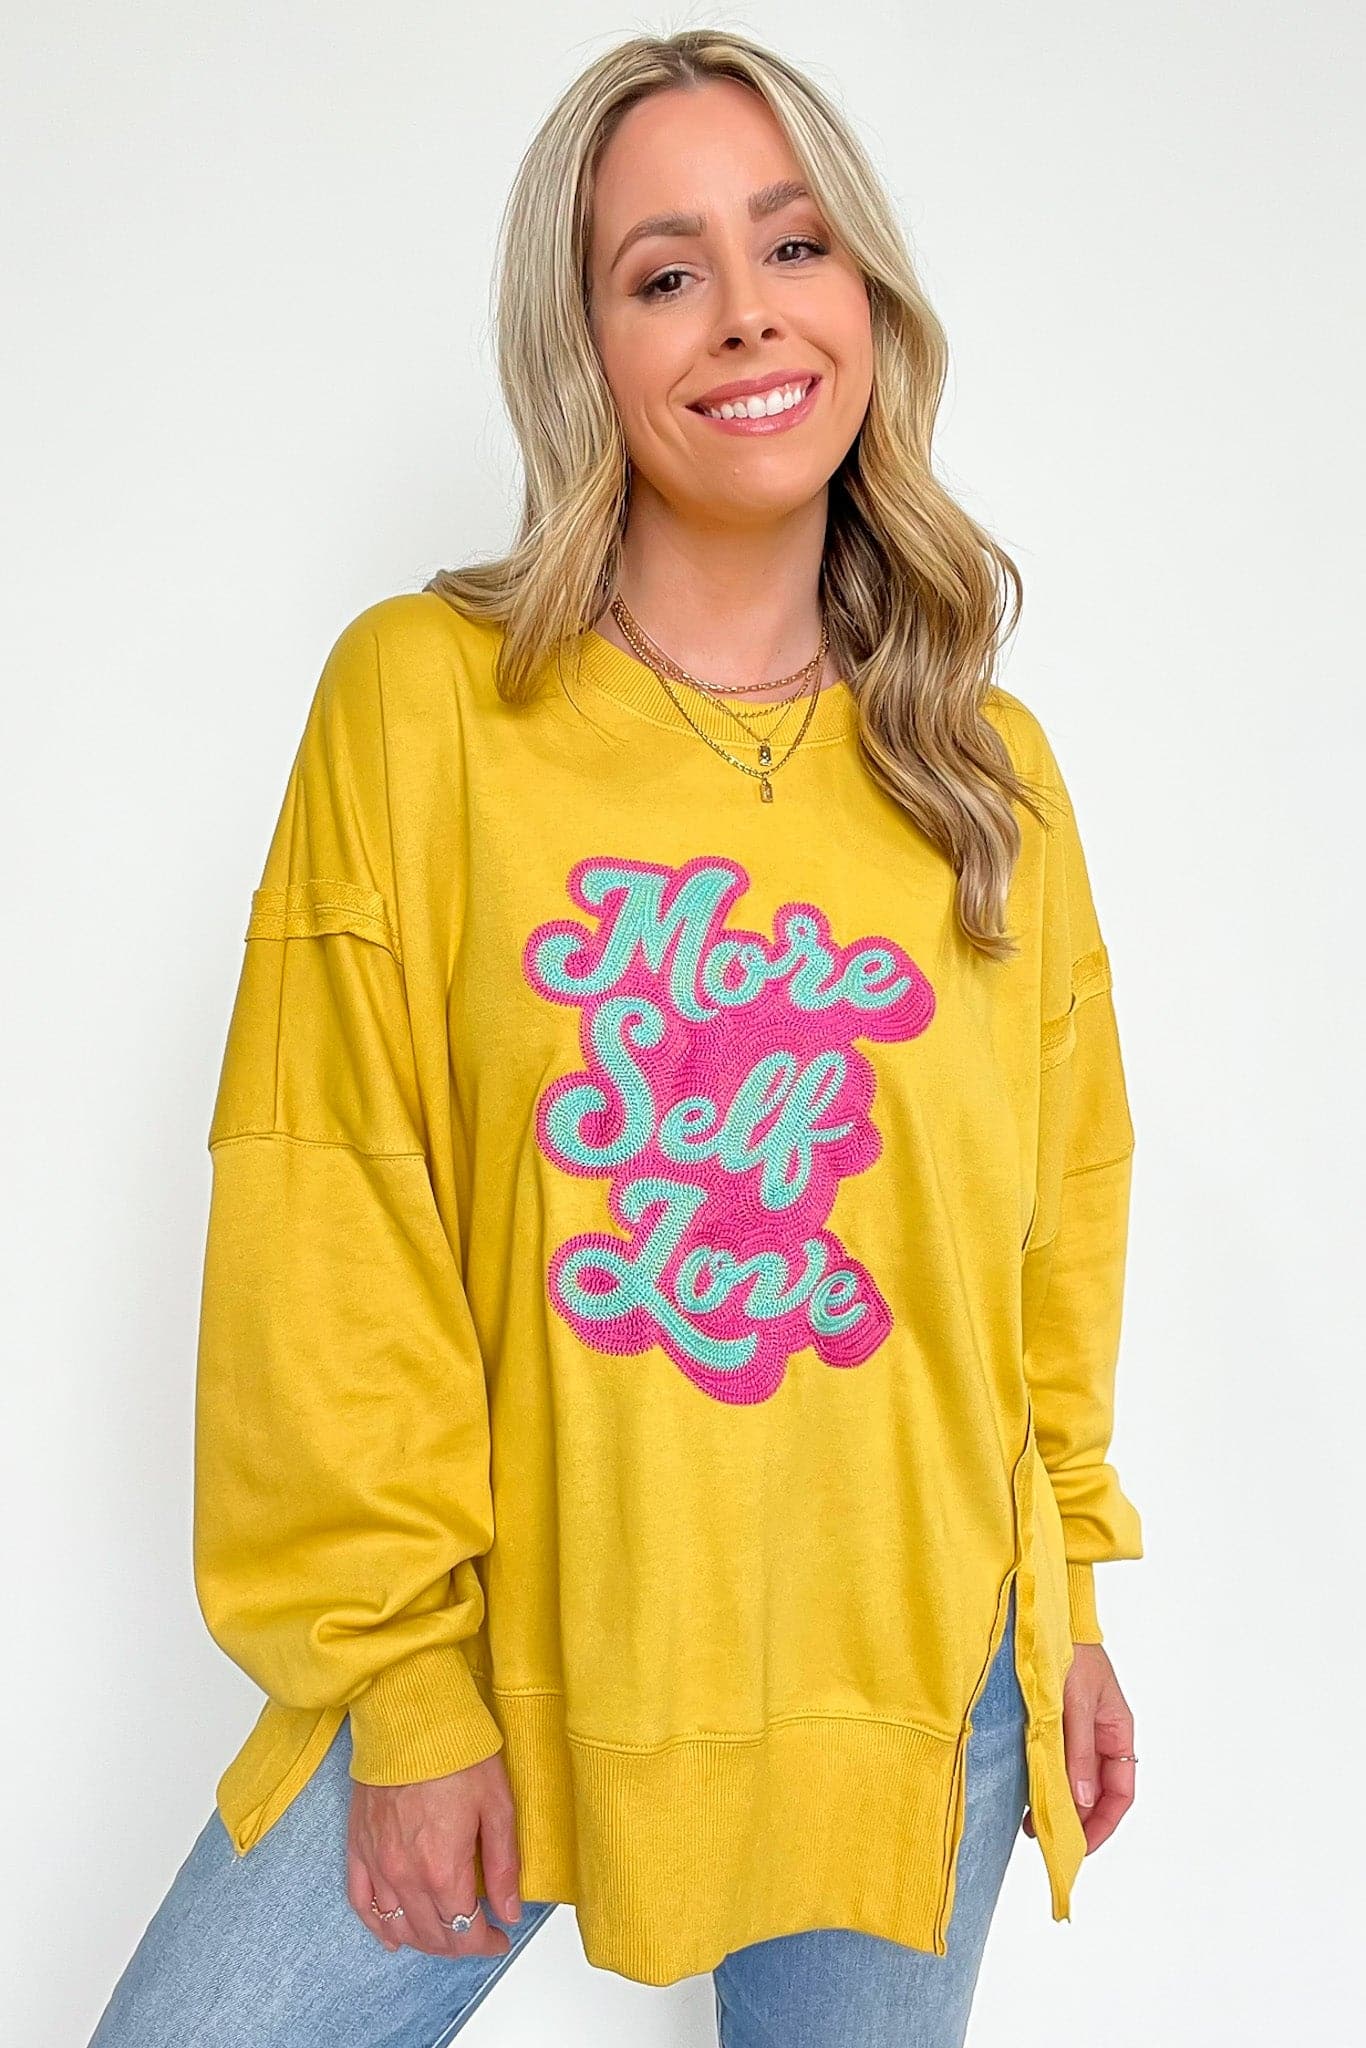  More Self Love Oversized Graphic Embroidered Pullover - FINAL SALE - Madison and Mallory